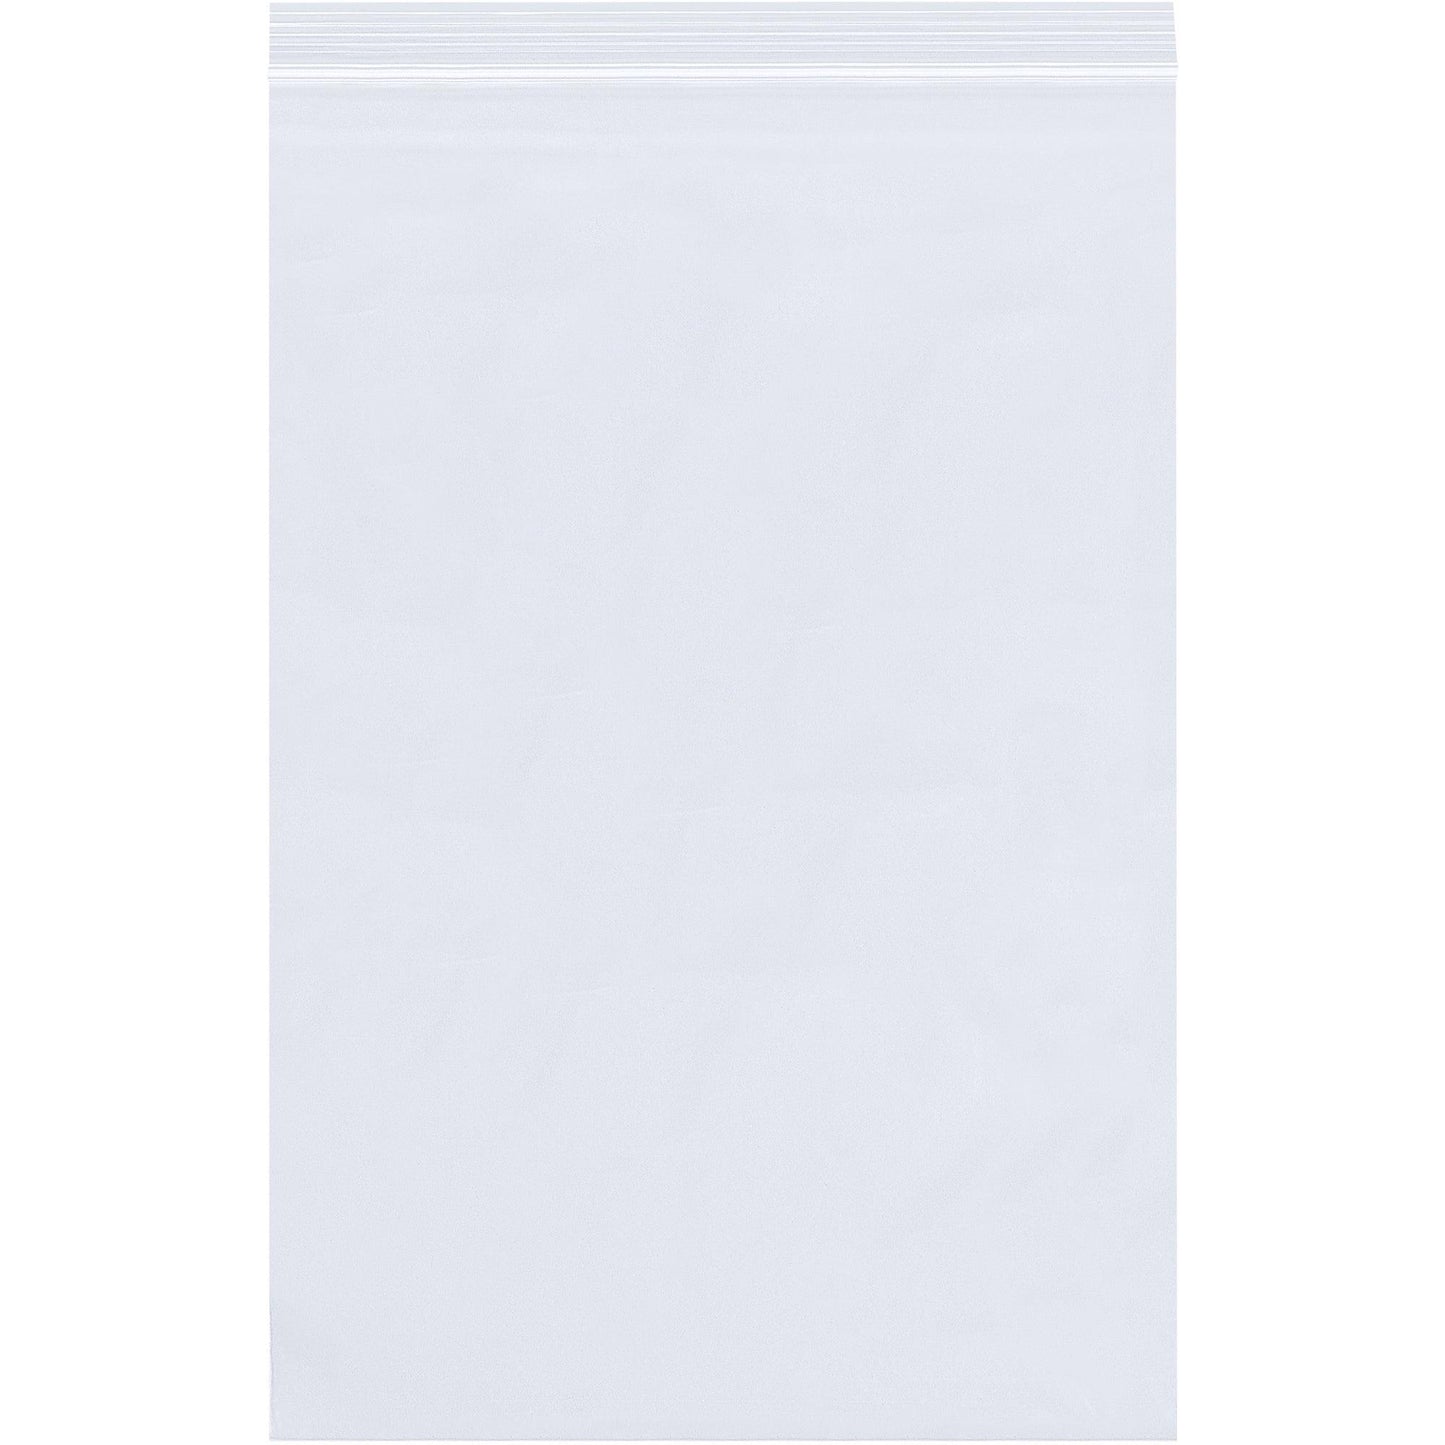 14 x 20" - 4 Mil Reclosable Poly Bags - PB3799